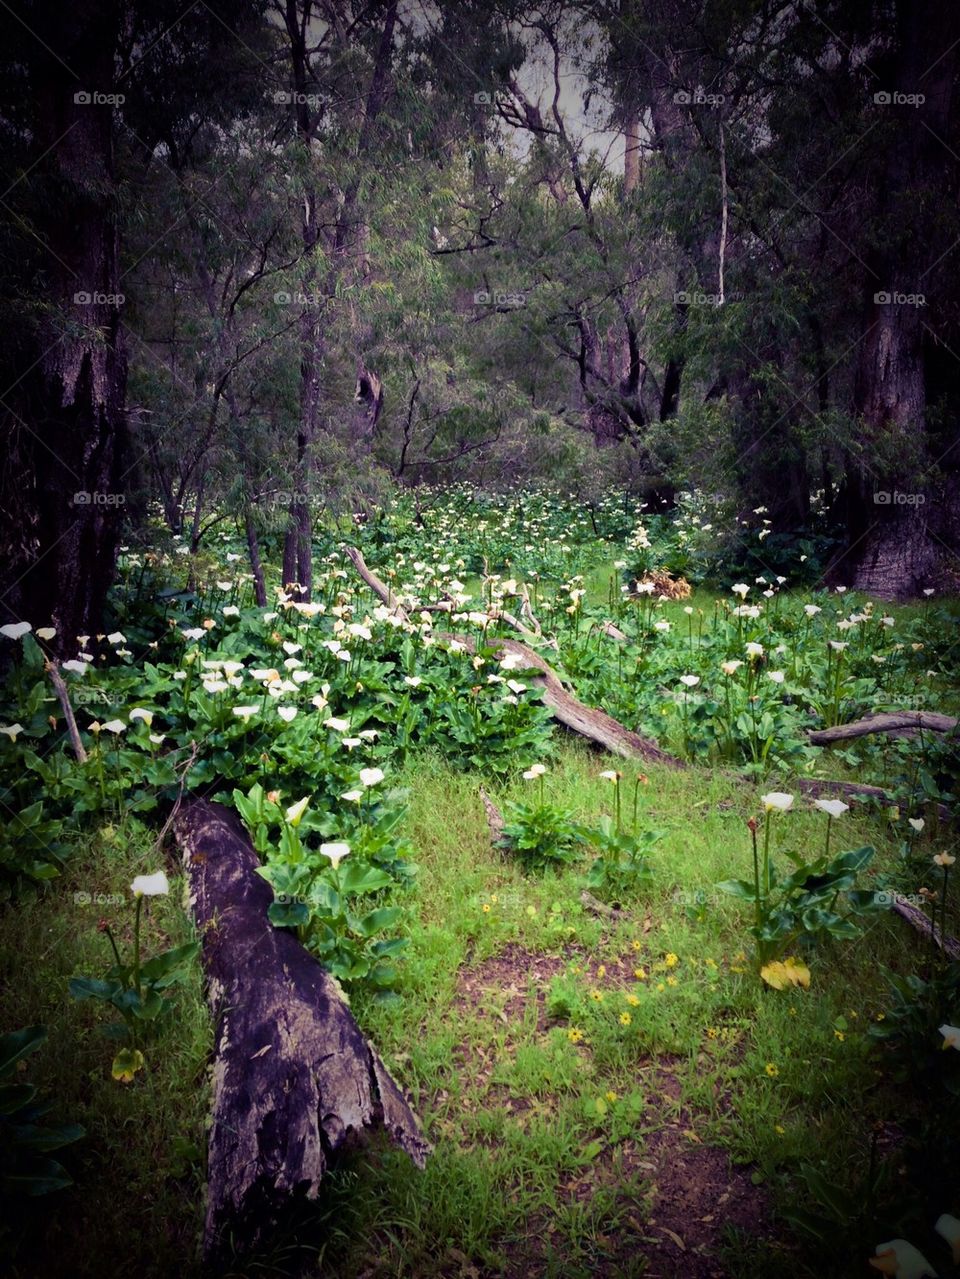 Lillies in the forrest